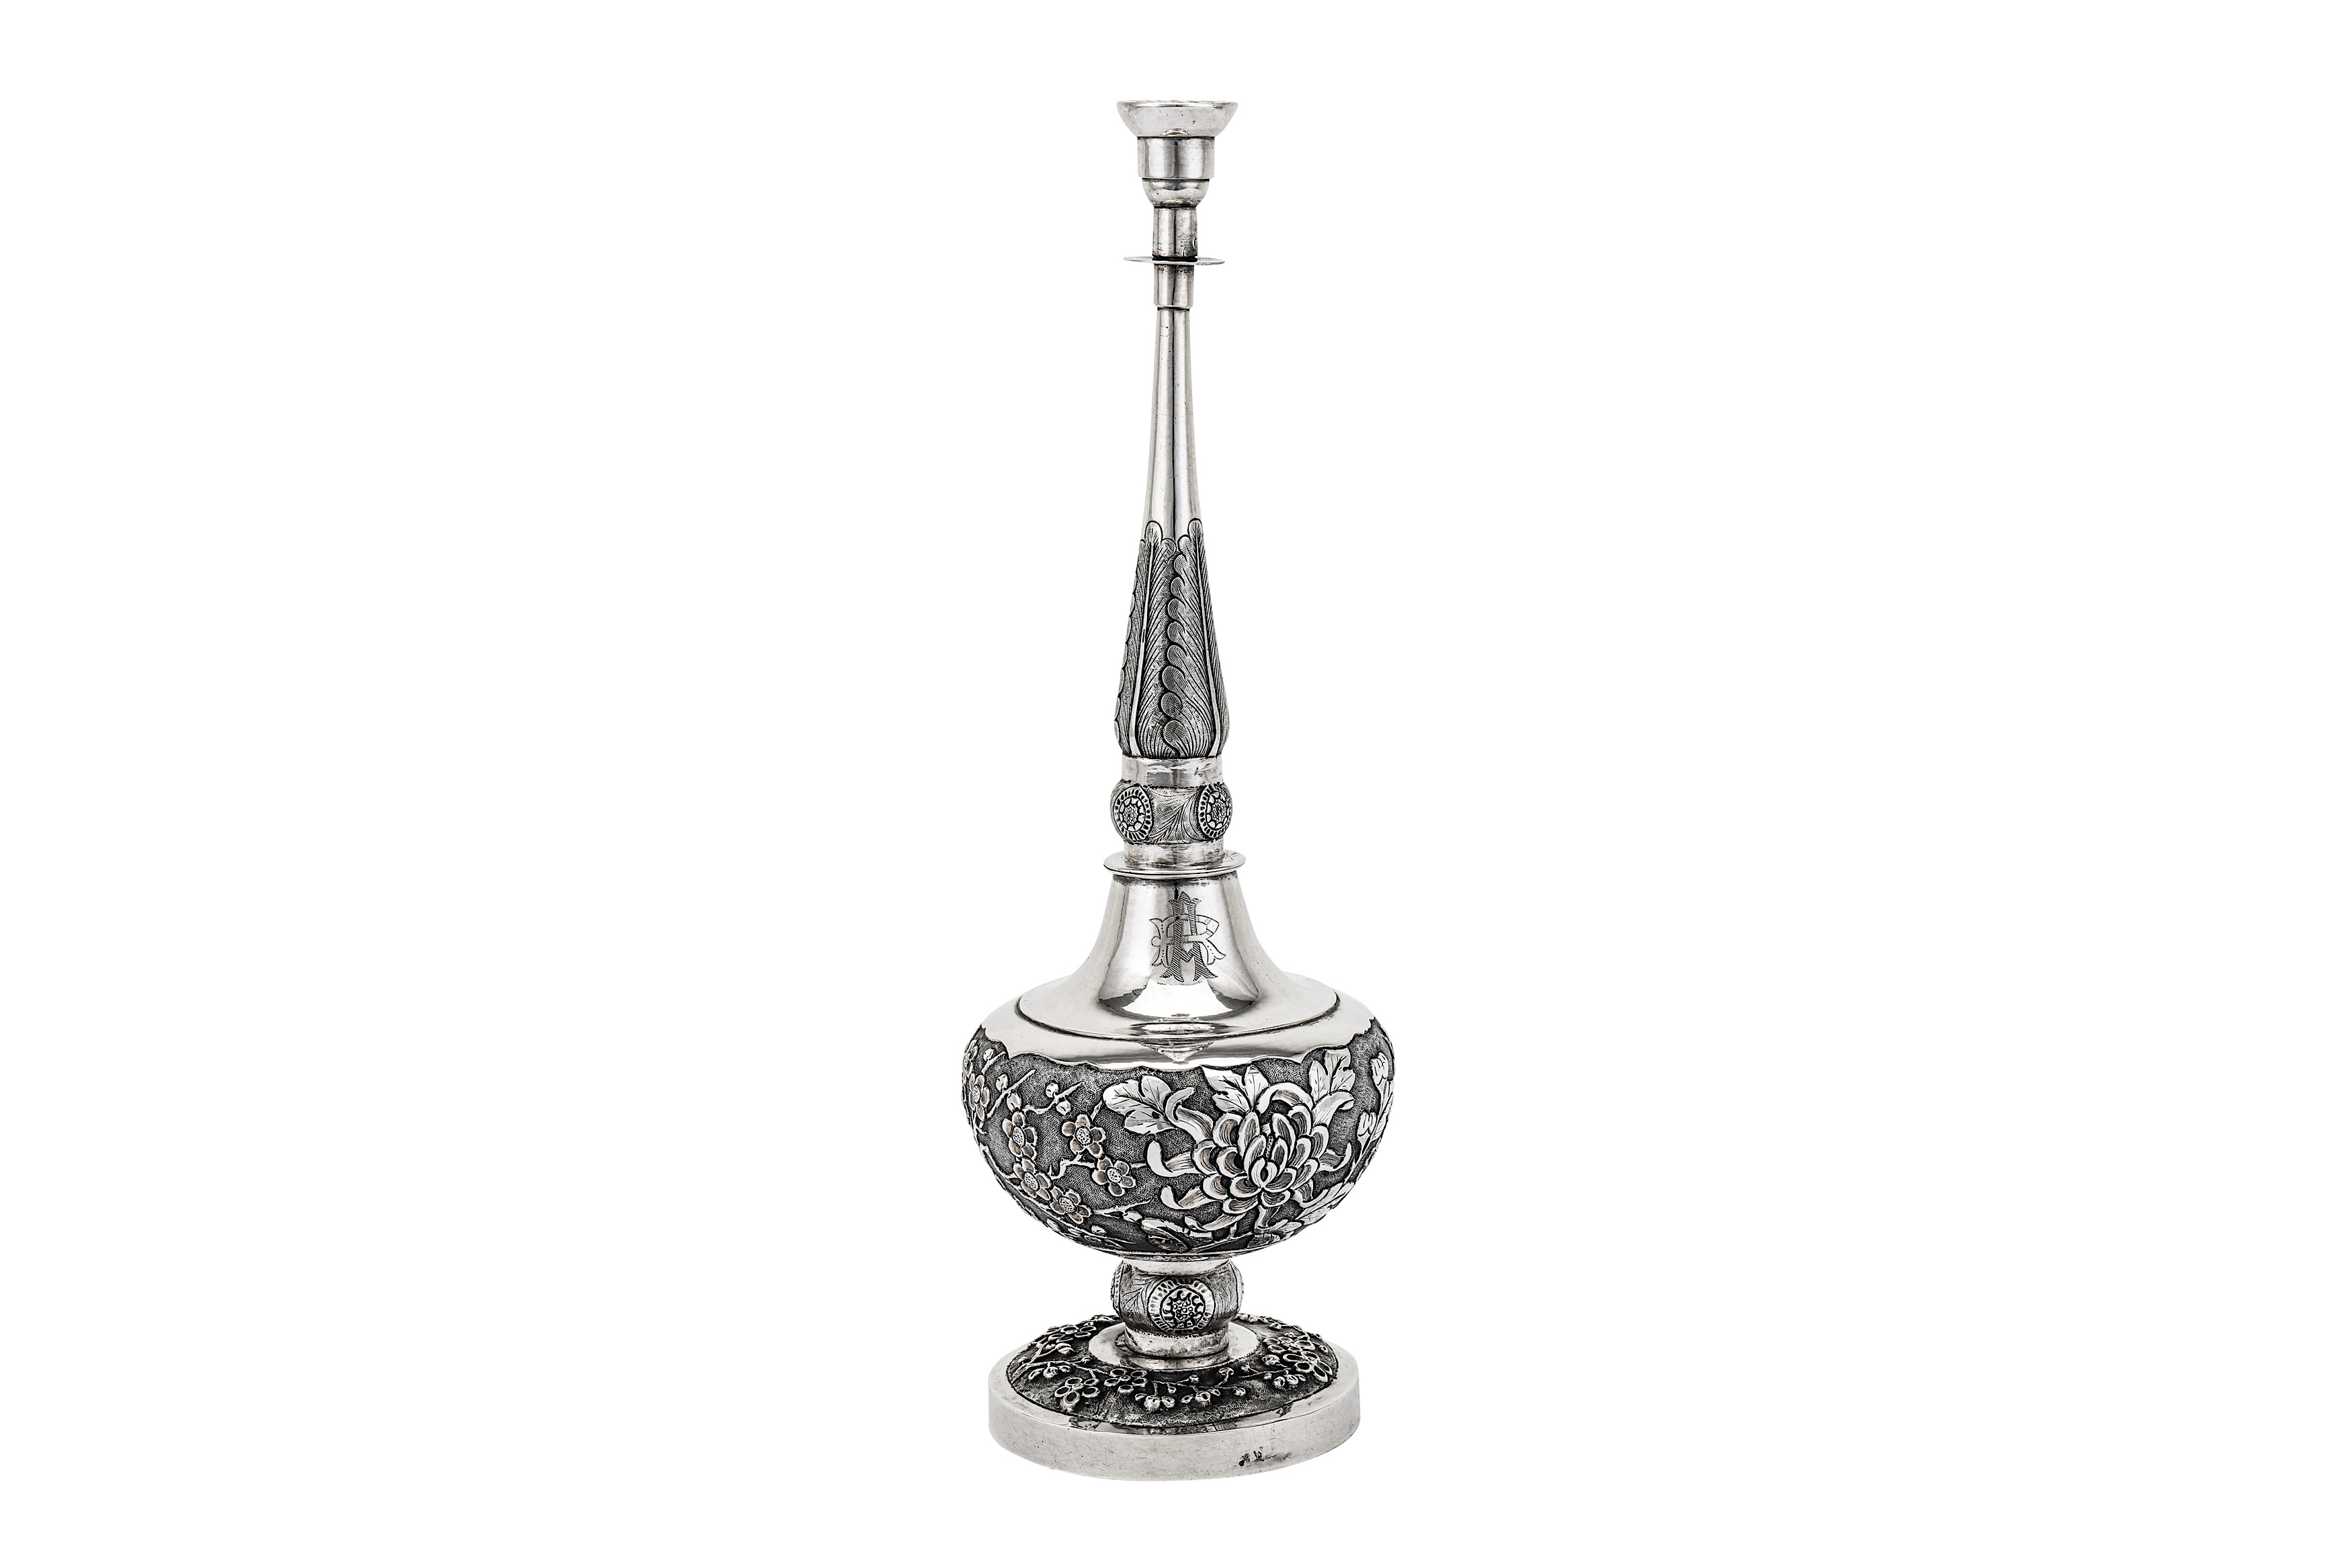 A late 19th century / early 20th century Chinese export silver rose water sprinkler, Canton circa